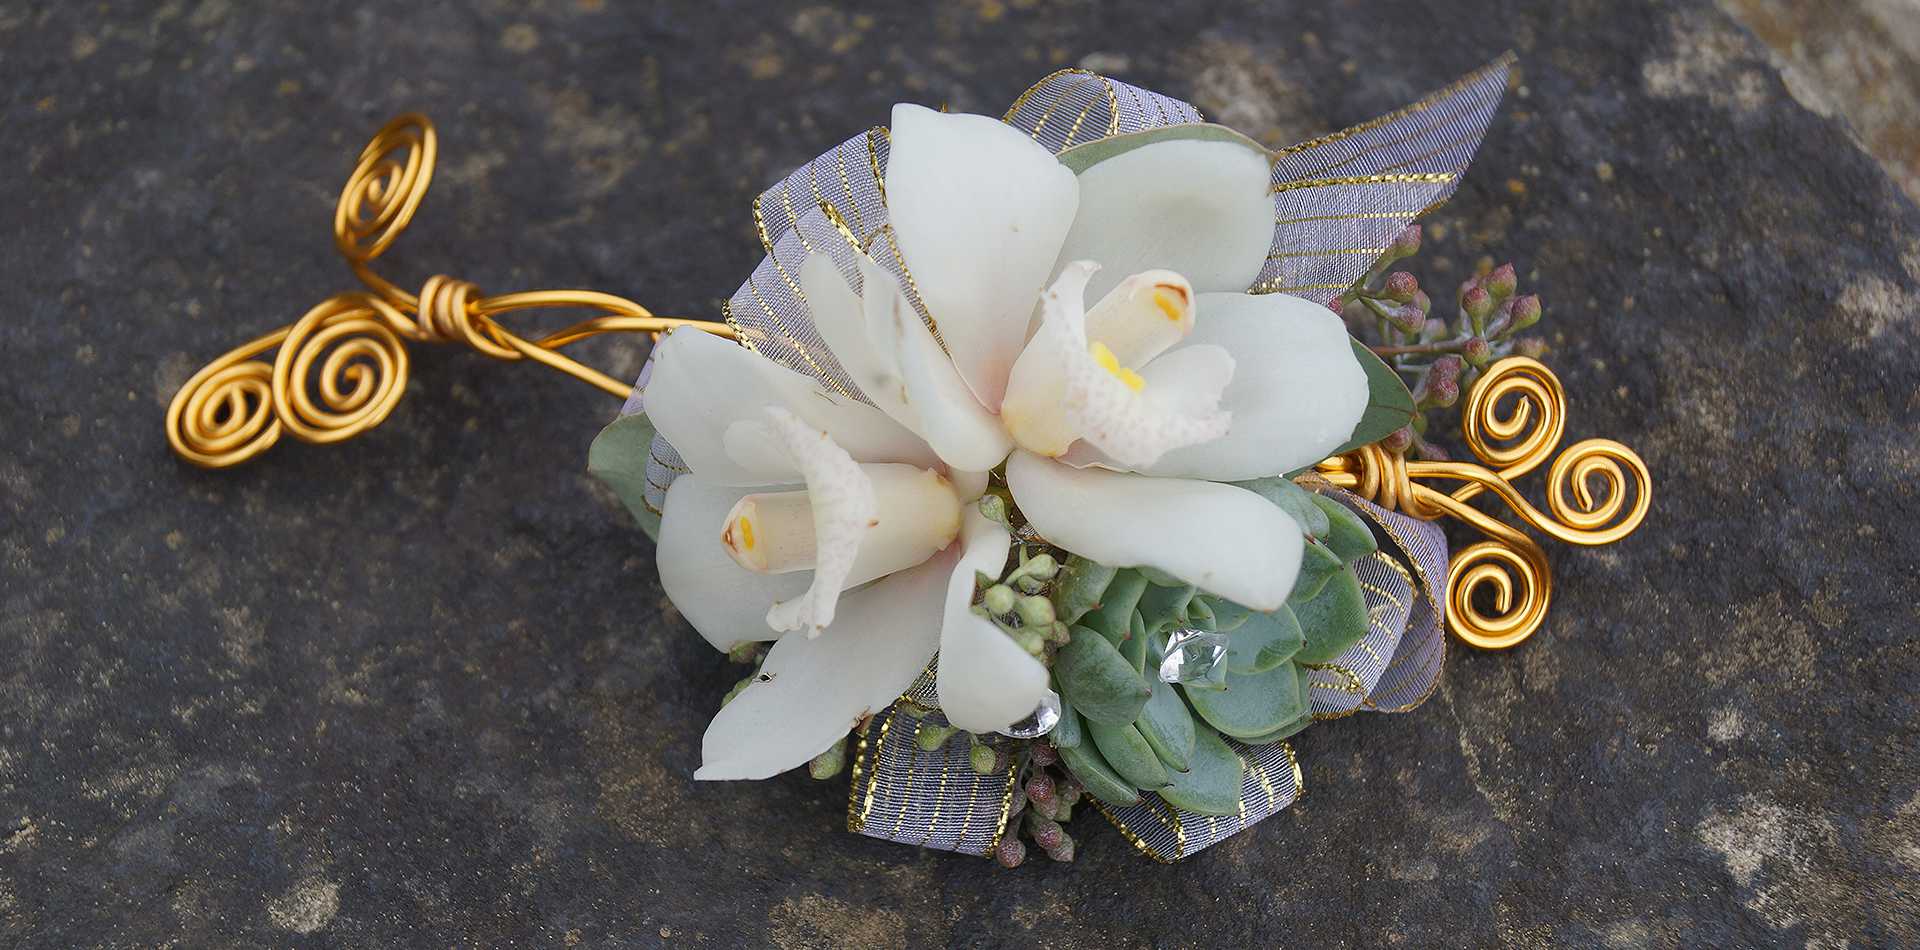 One-size-fits-all' wrist corsage is Most Inspirational Corsage Design